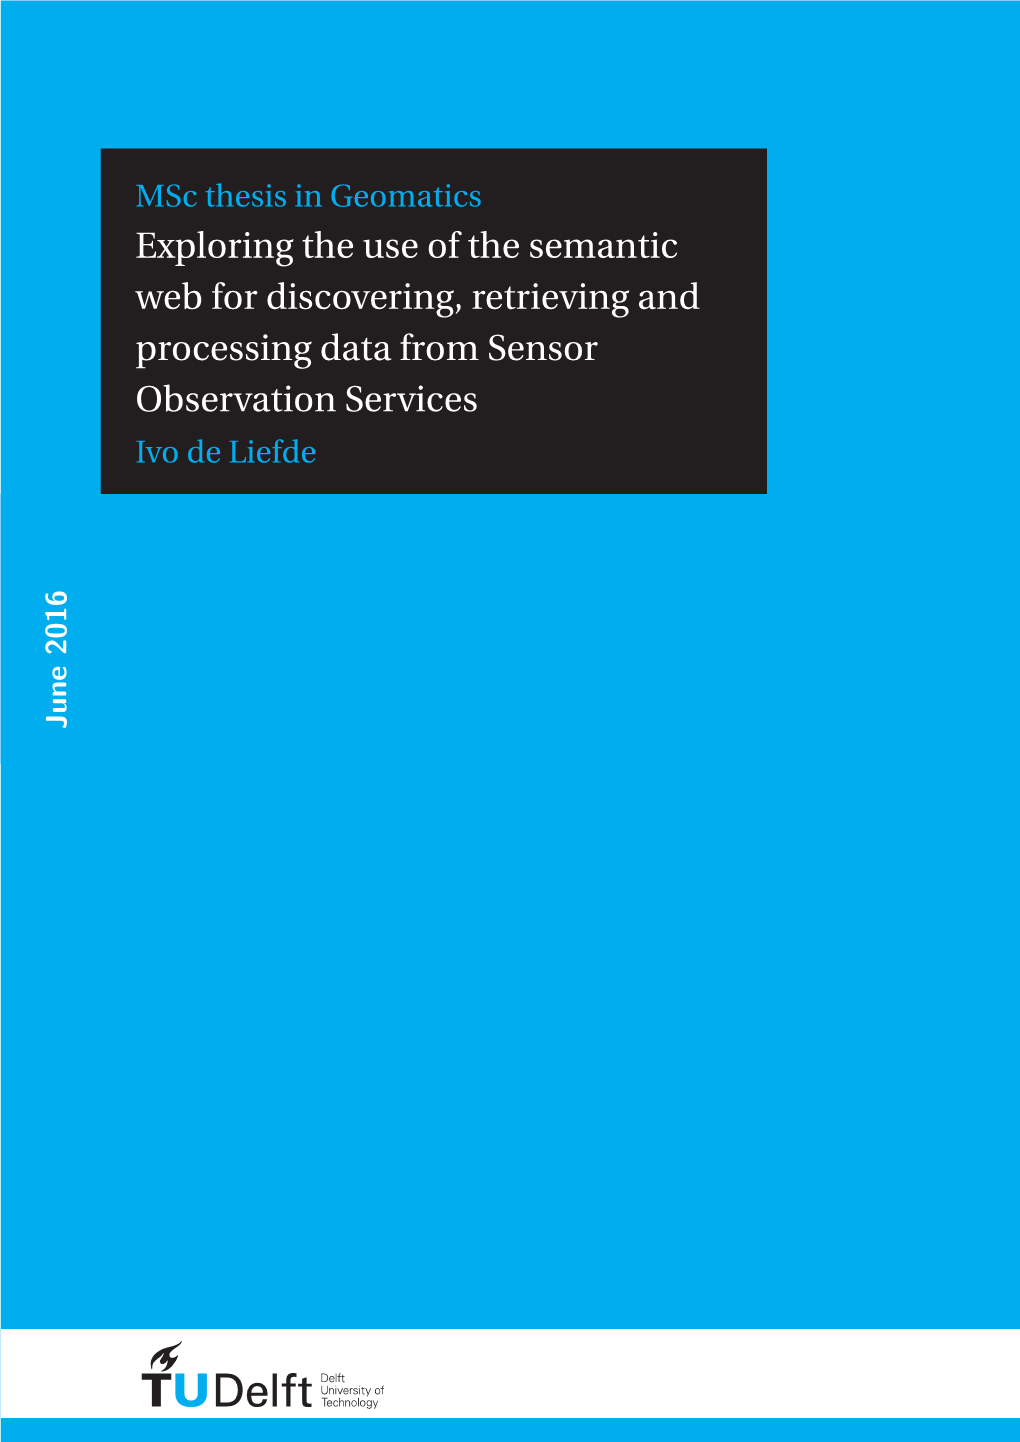 Exploring the Use of the Semantic Web for Discovering, Retrieving and Processing Data from Sensor Observation Services Ivo De Liefde June 2016